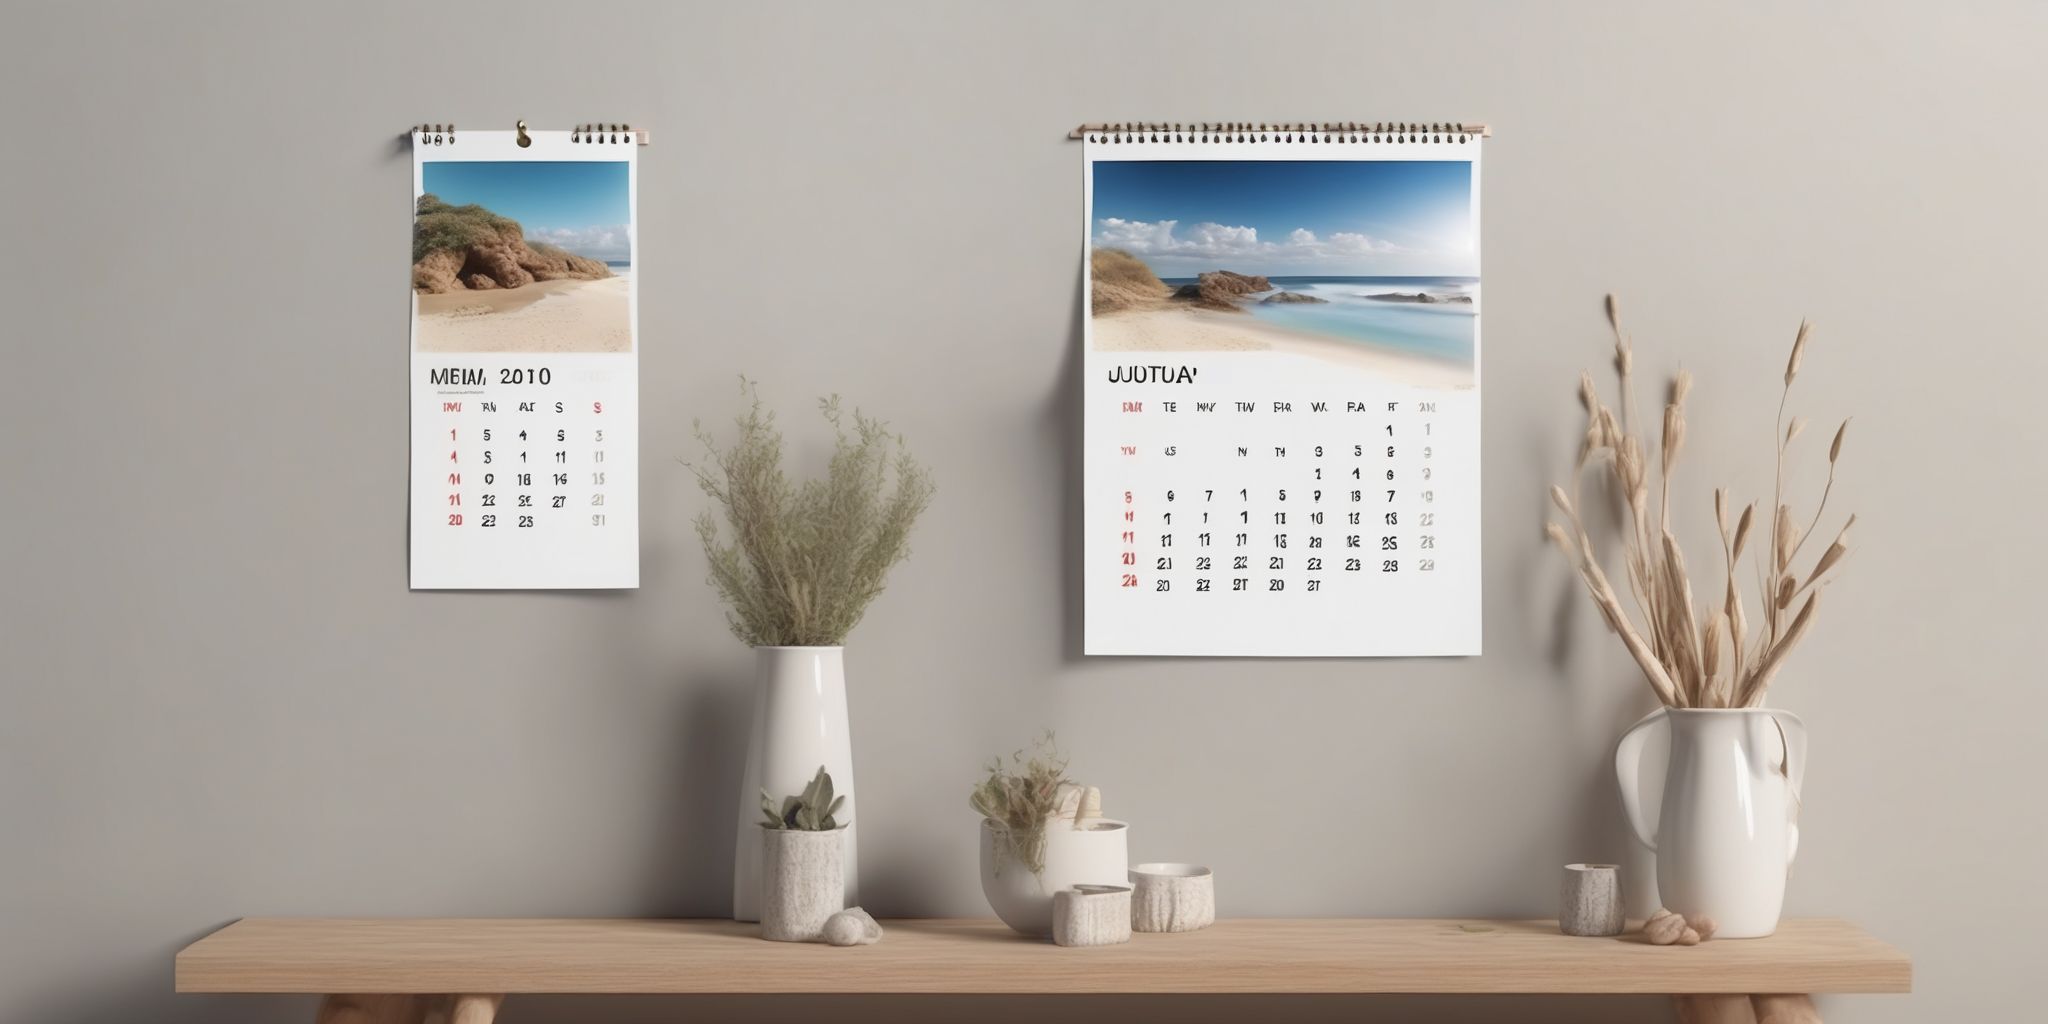 Calendar  in realistic, photographic style